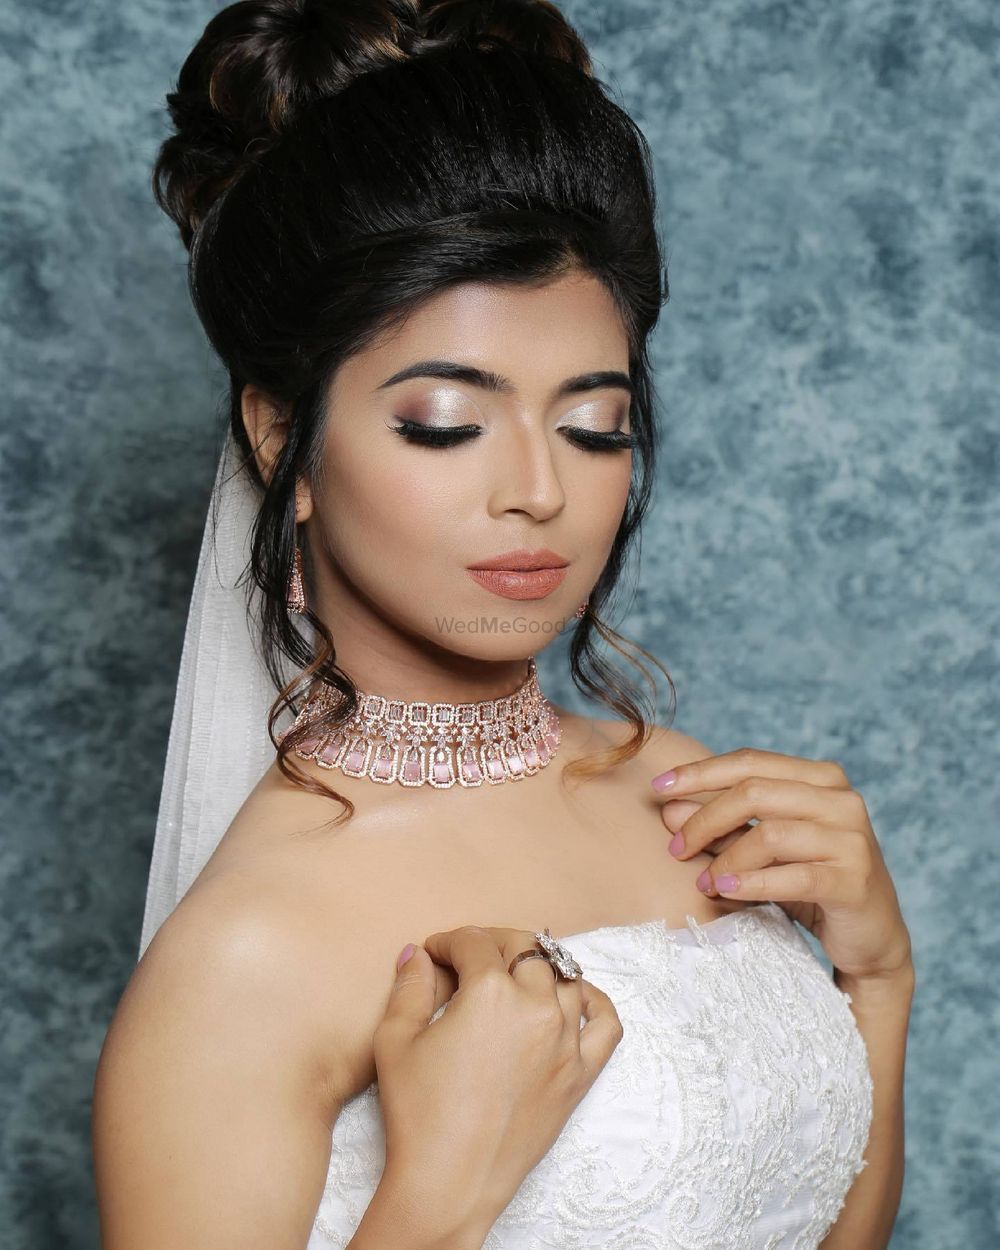 Photo From Christian Bridal Makeup - By Zorains Studio